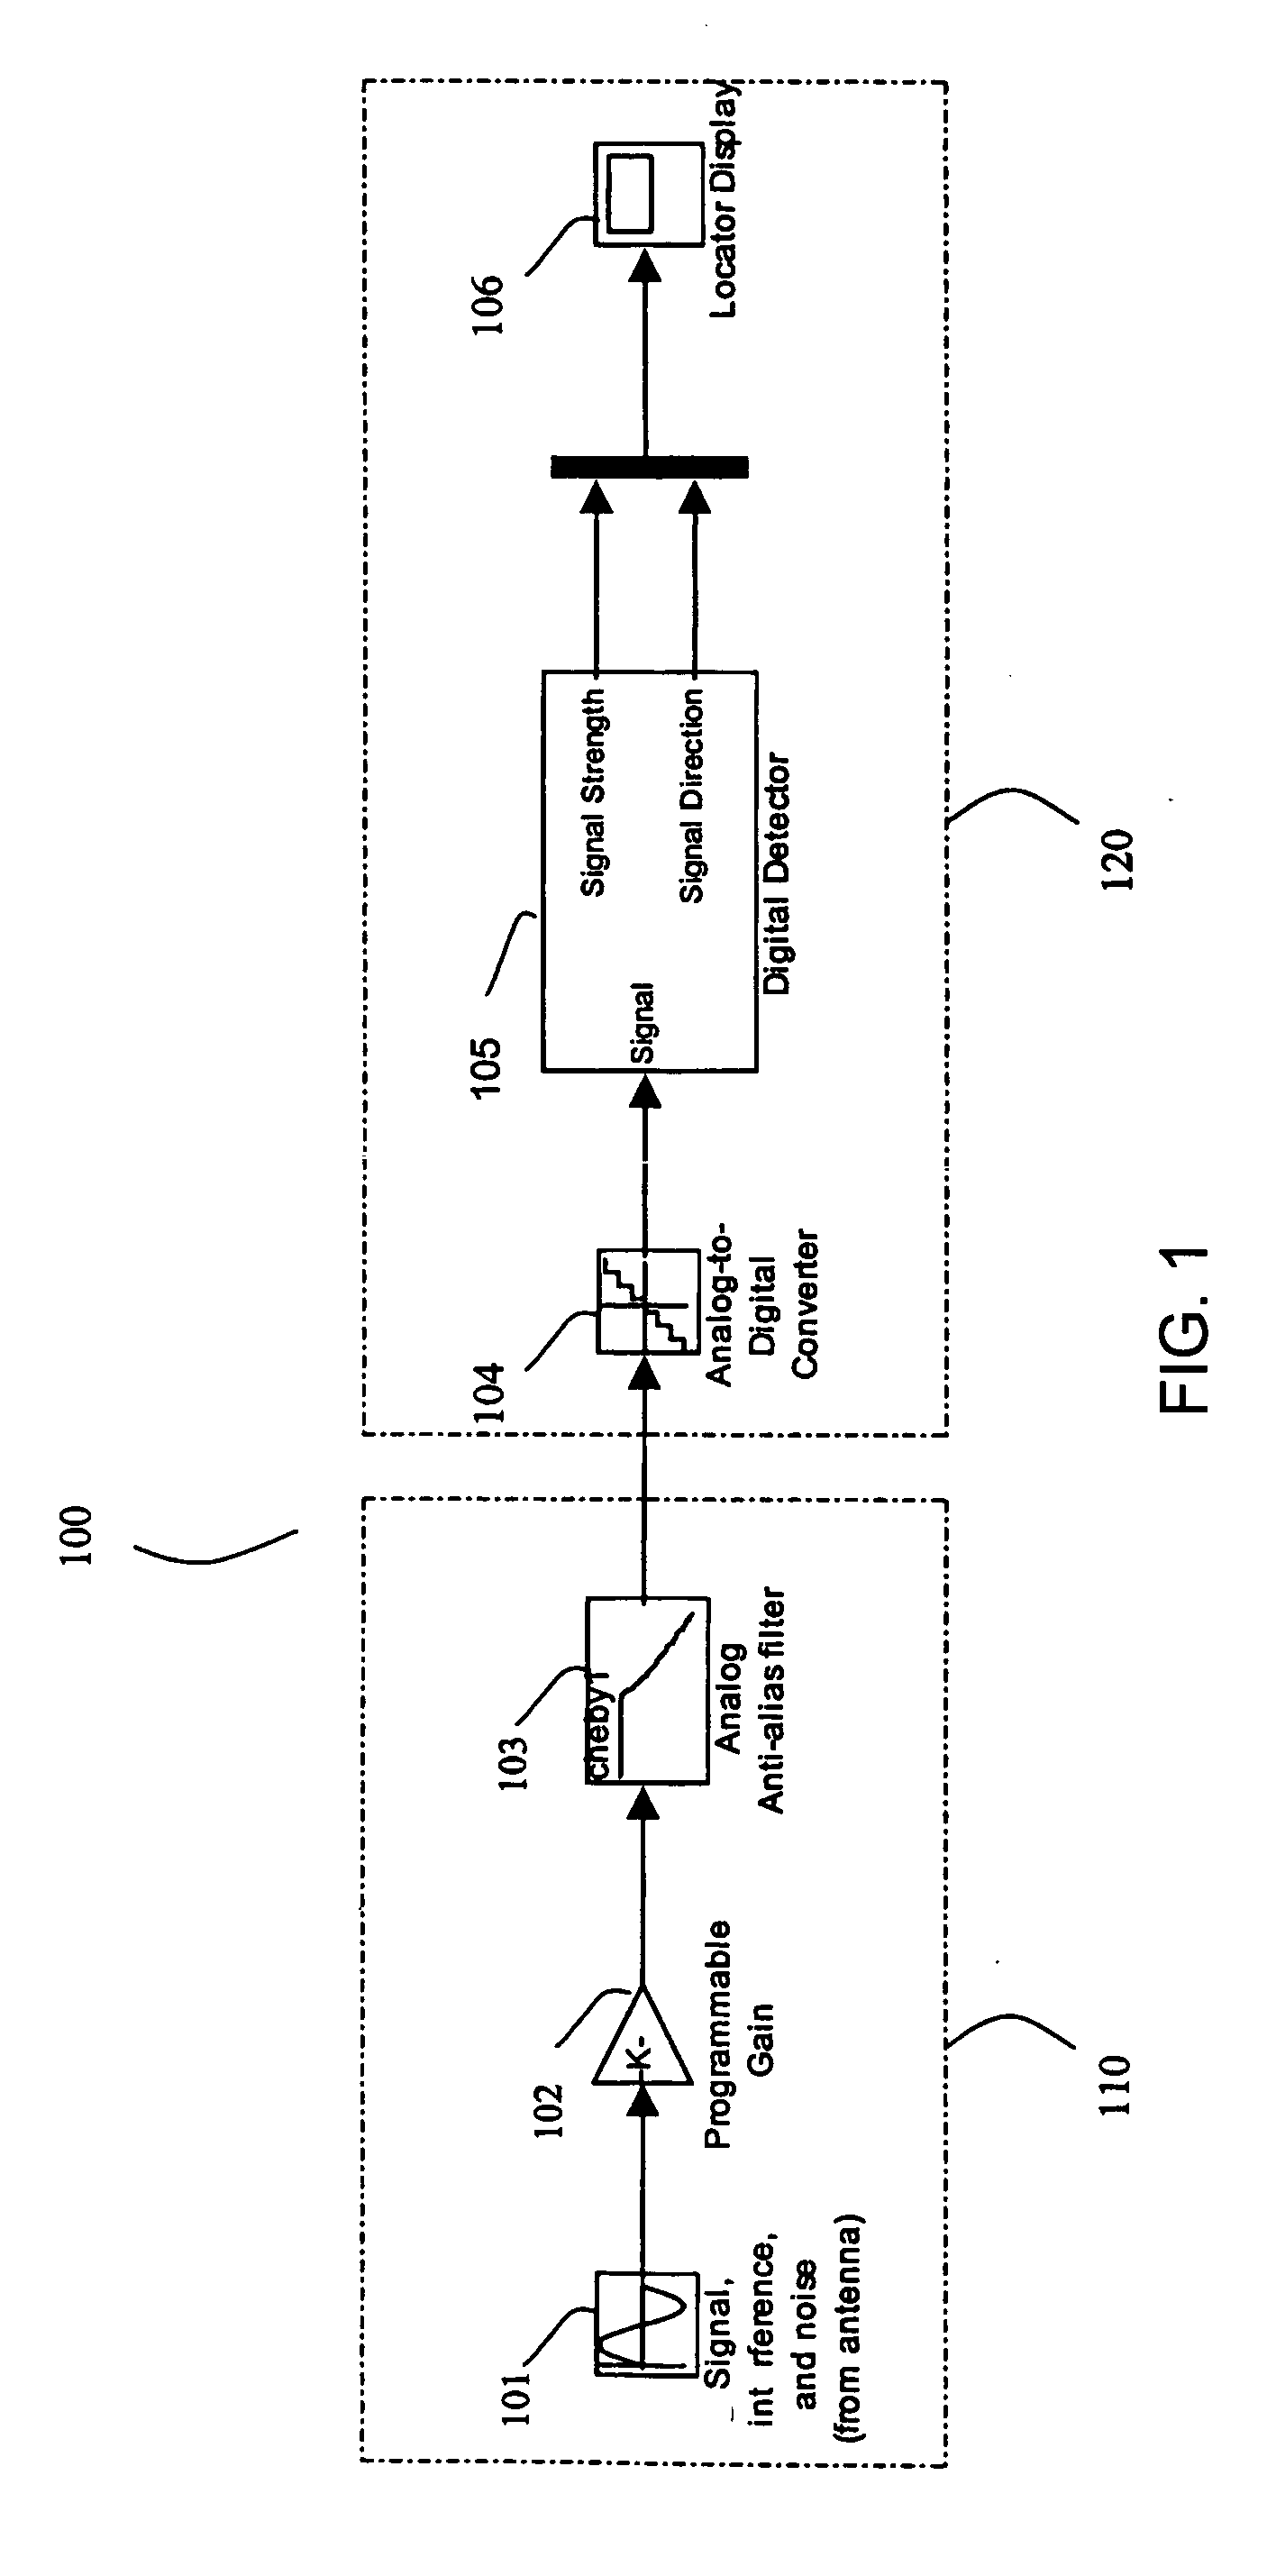 Method and apparatus for digital detection of electromagnetic signal strength and signal direction in metallic pipes and cables